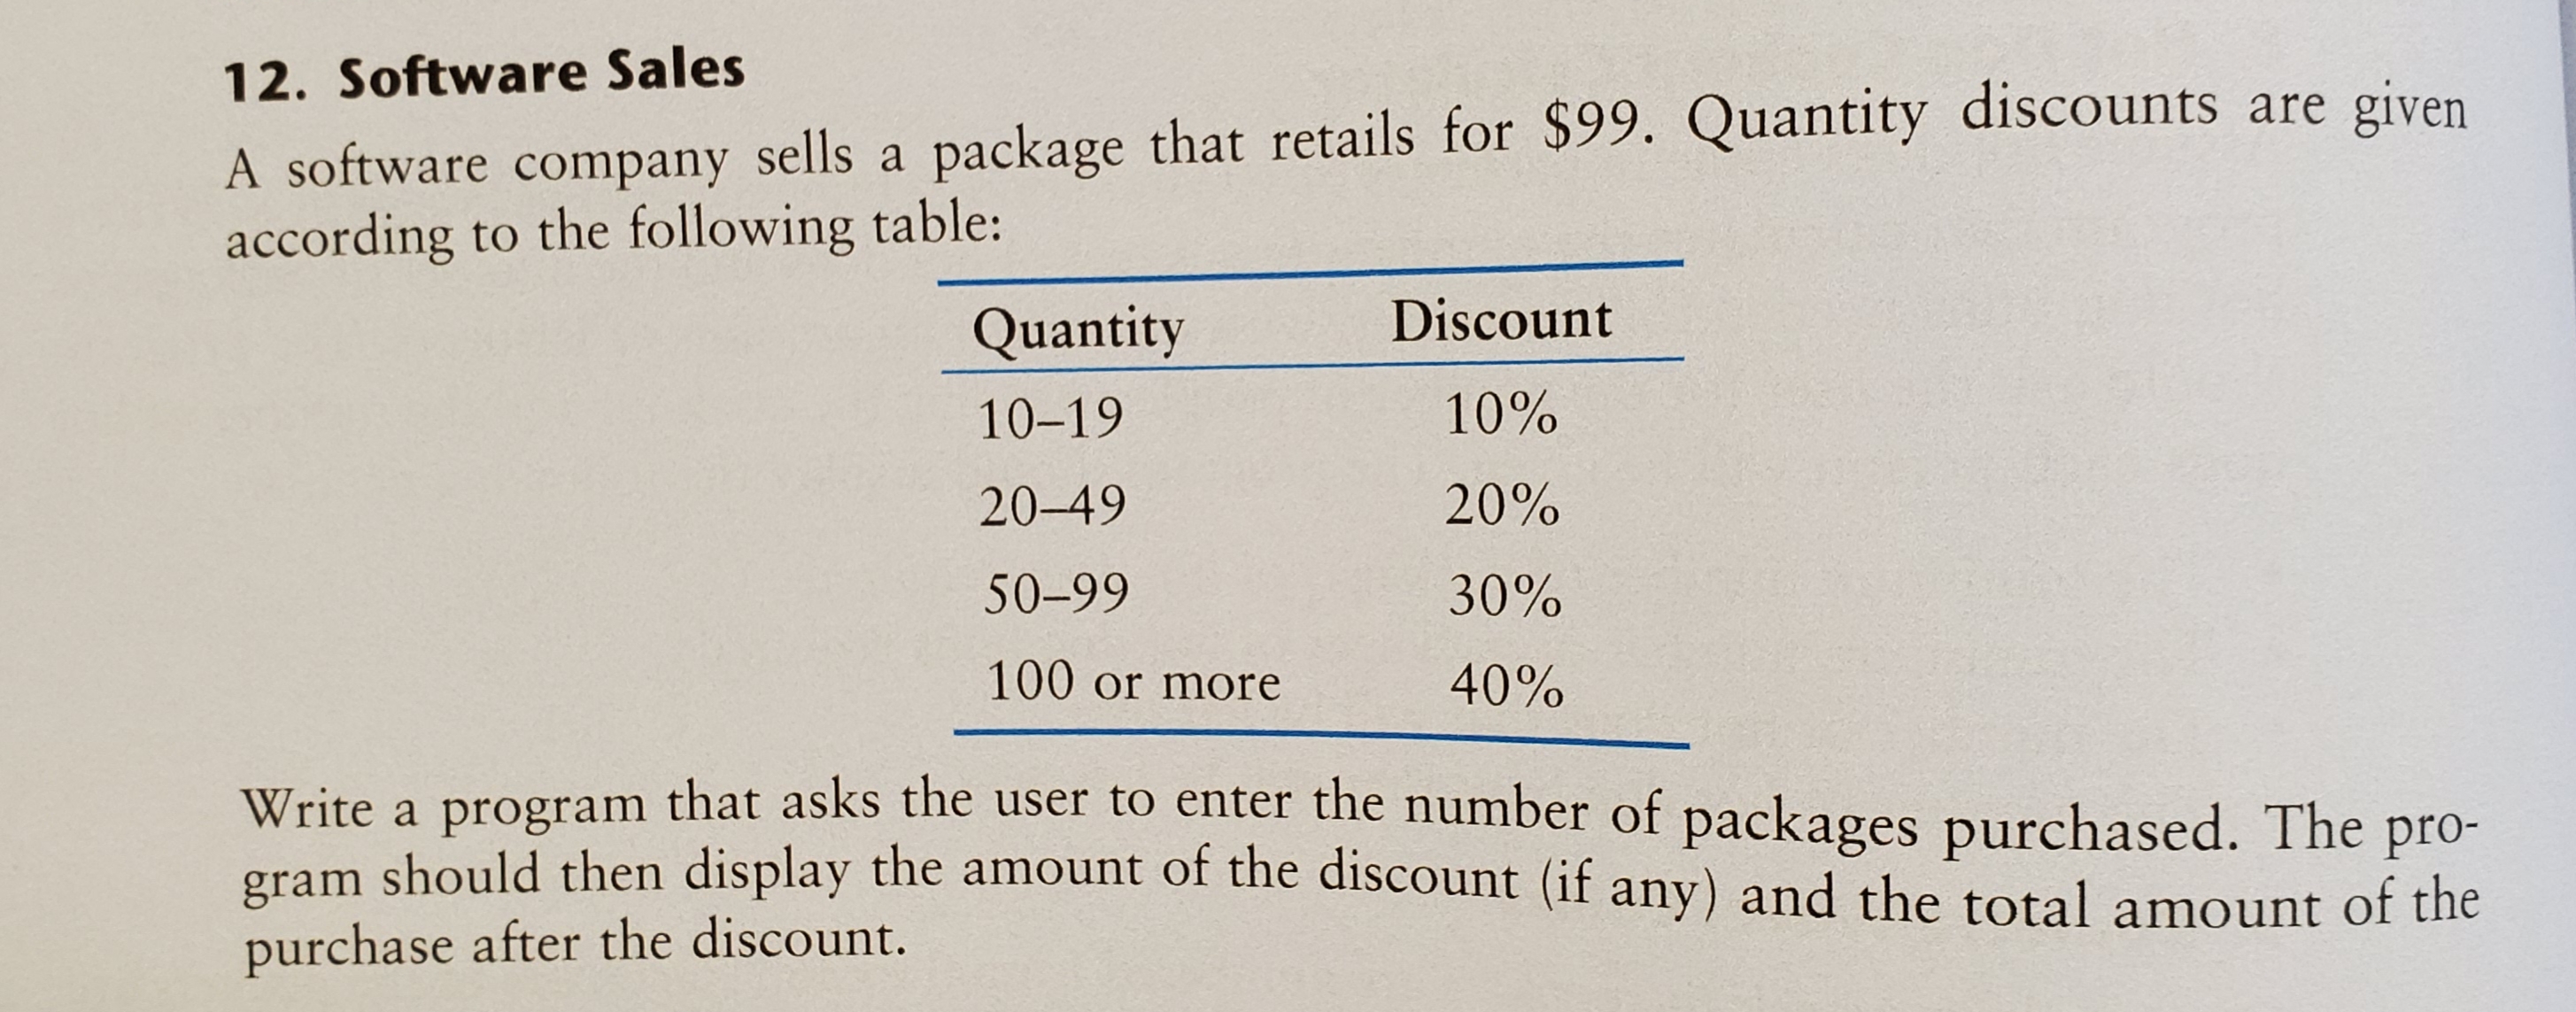 12. Software Sales
A software company sells a package that retails for $99. Quantity discounts are given
according to the following table:
Quantity
Discount
10-19
10%
20-49
20%
50-99
30%
100 or more
40%
Write a program that asks the user to enter the number of packages purchased. The pro-
should then display the amount of the discount (if any) and the total amount of the
gram
purchase after the discount.
